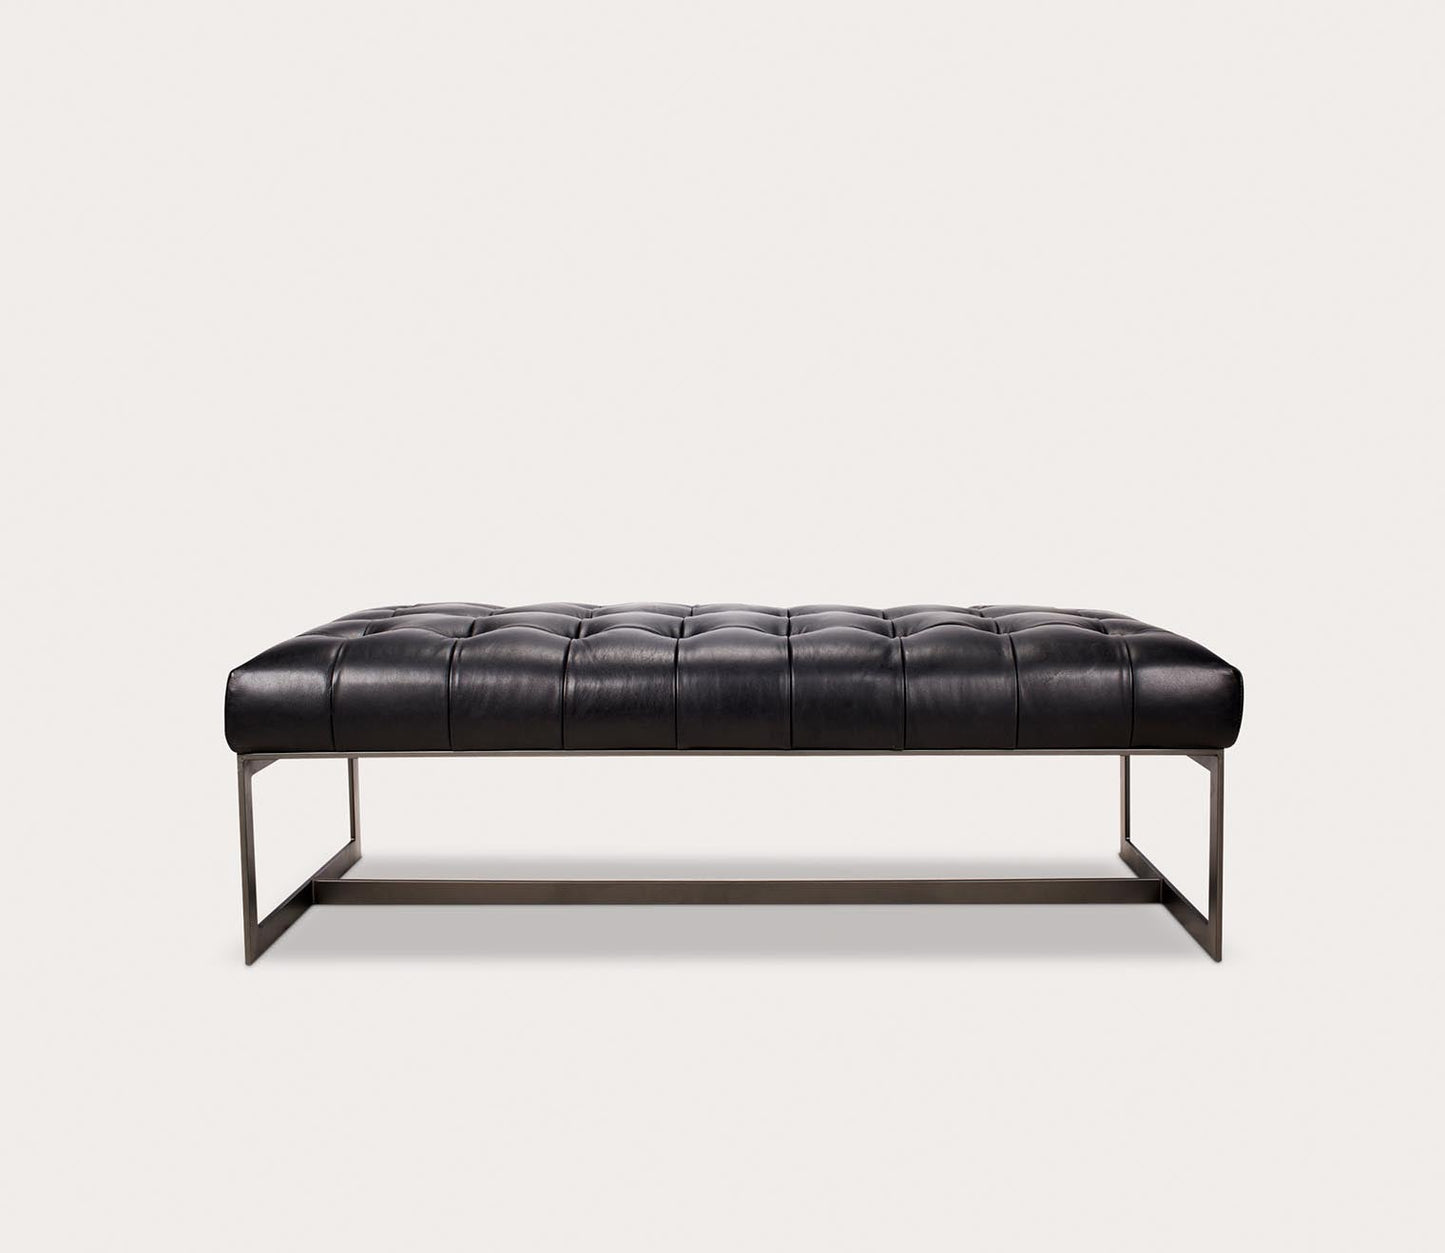 Wyatt Tufted Buffalo Leather Bench by Moe's Furniture